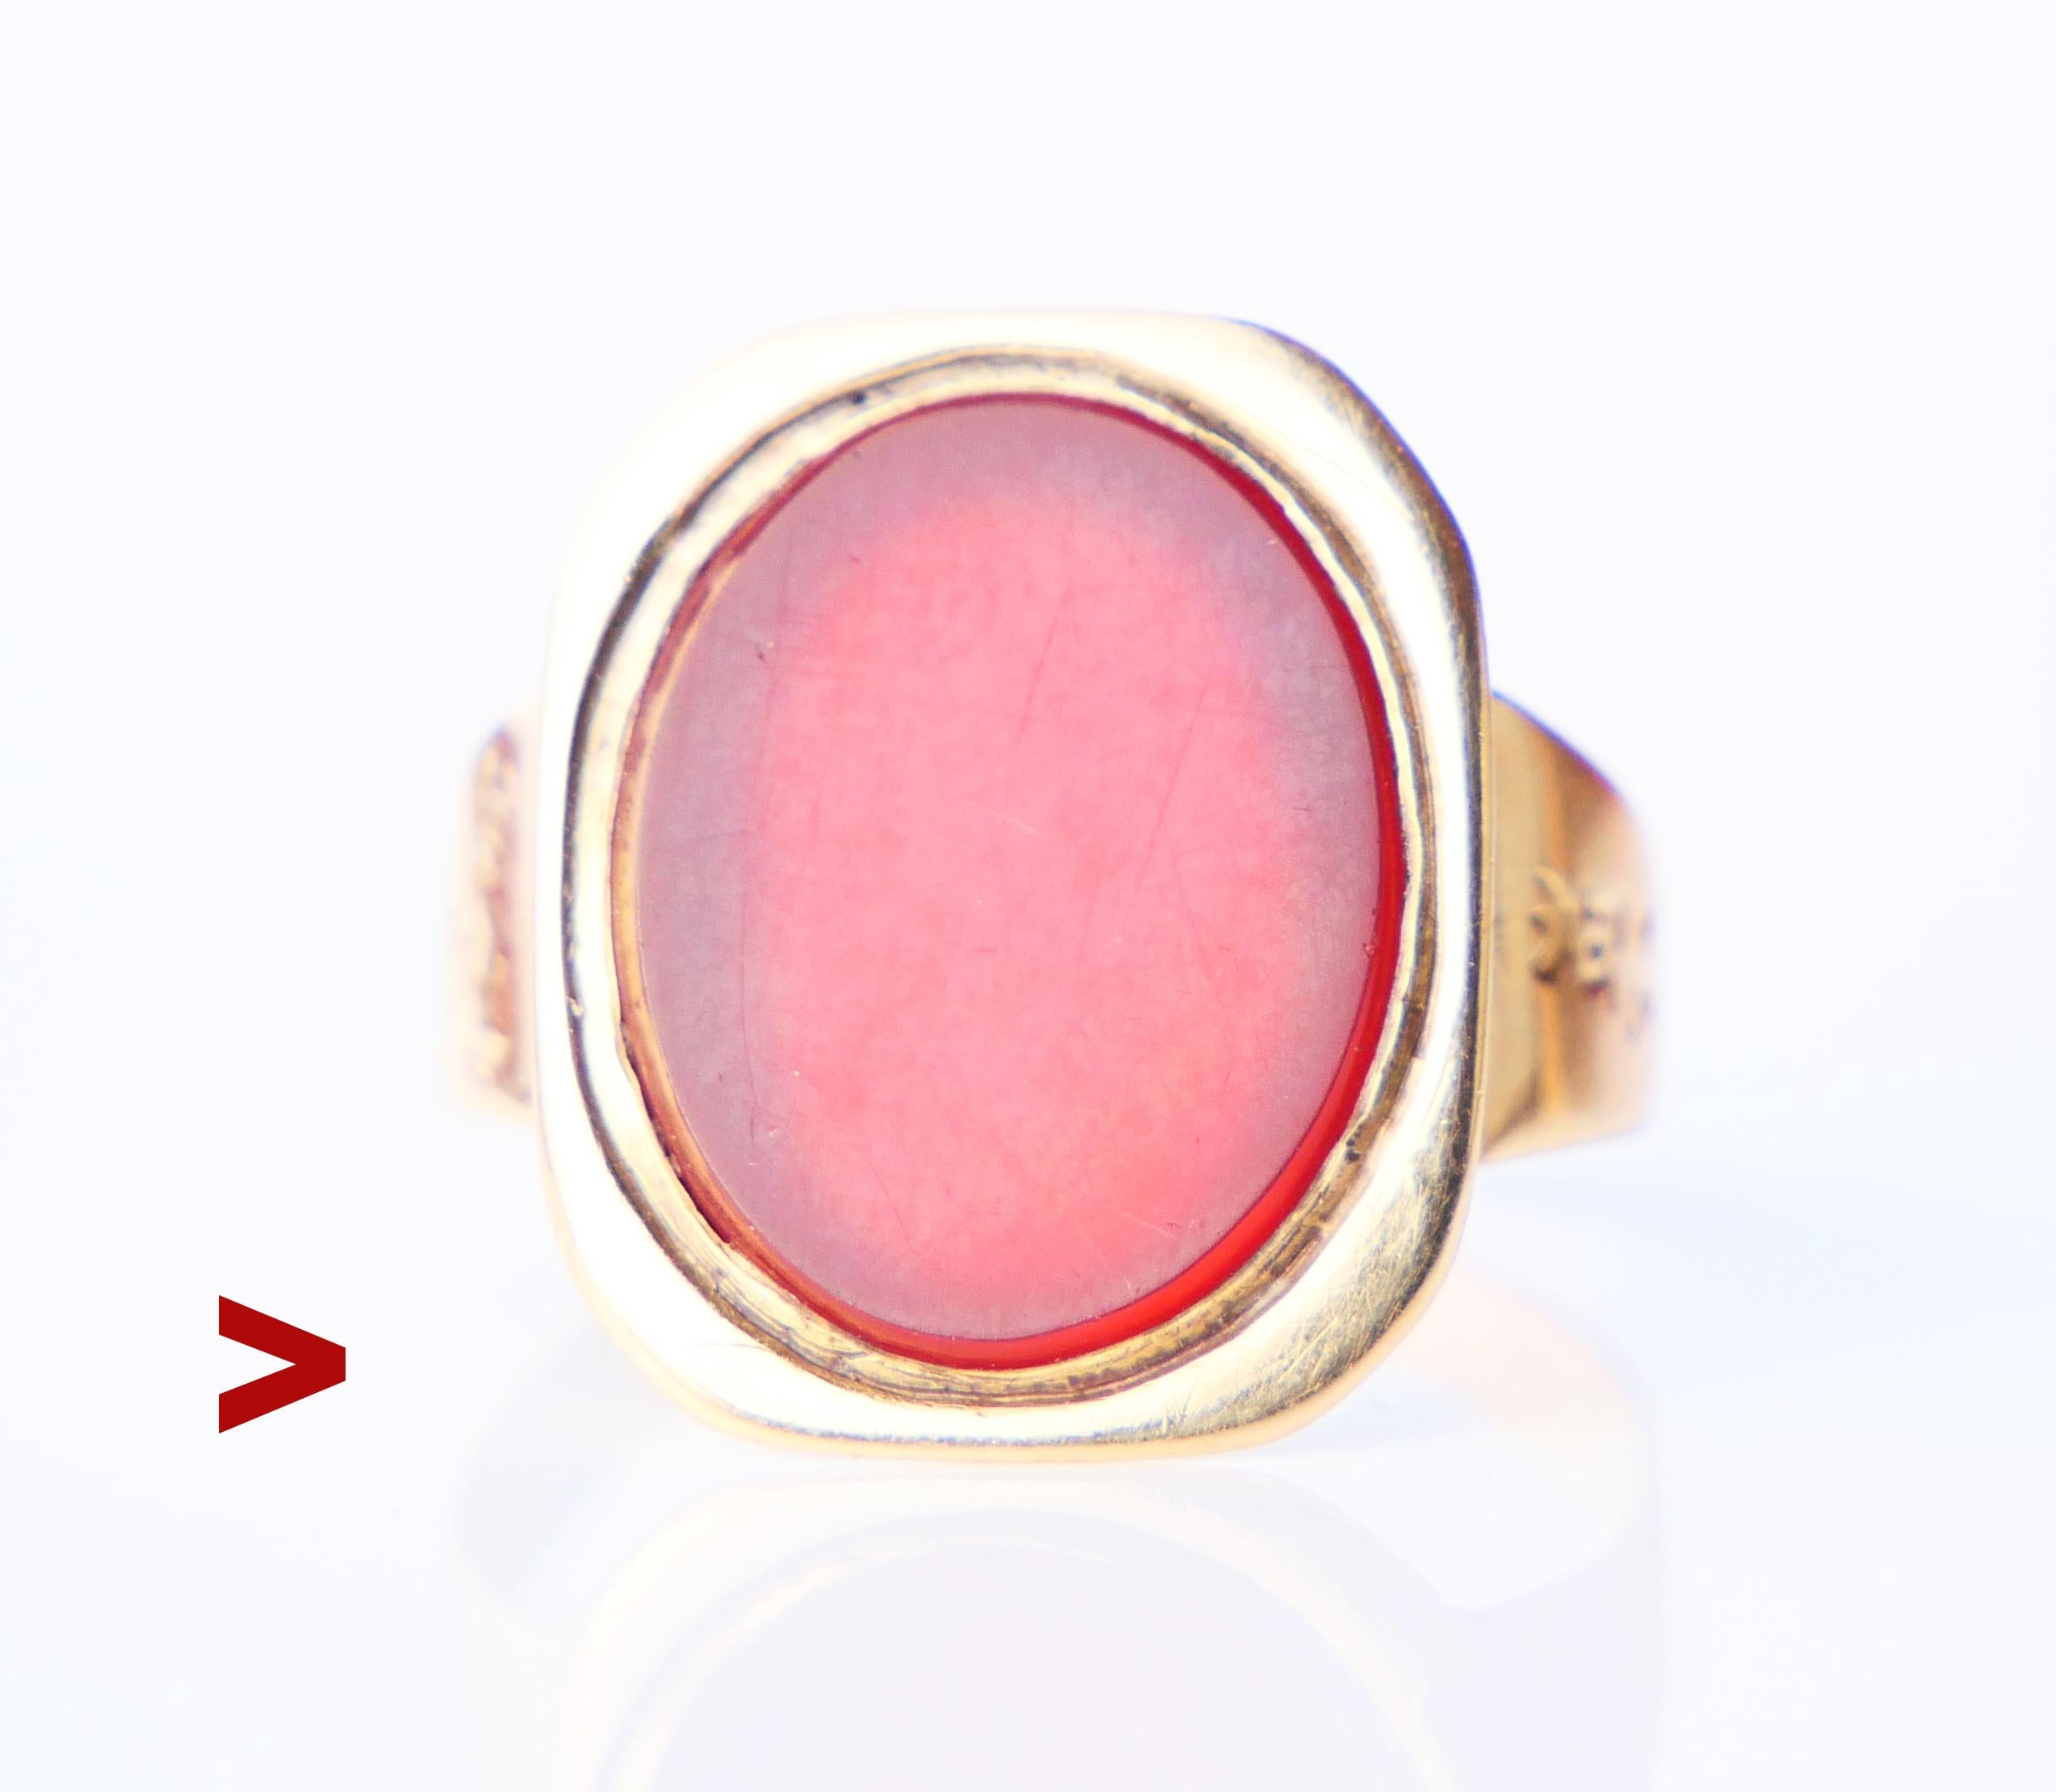 Signet Ring - in Empire style in solid 18K Yellow Gold adorned with a bezel set Orange plate of Carnelian stone with flat polished top and faceted edge.

Worn Swedish hallmarks,18K Gold, and maker's. The date combo is Y3 / created in the year 1829.